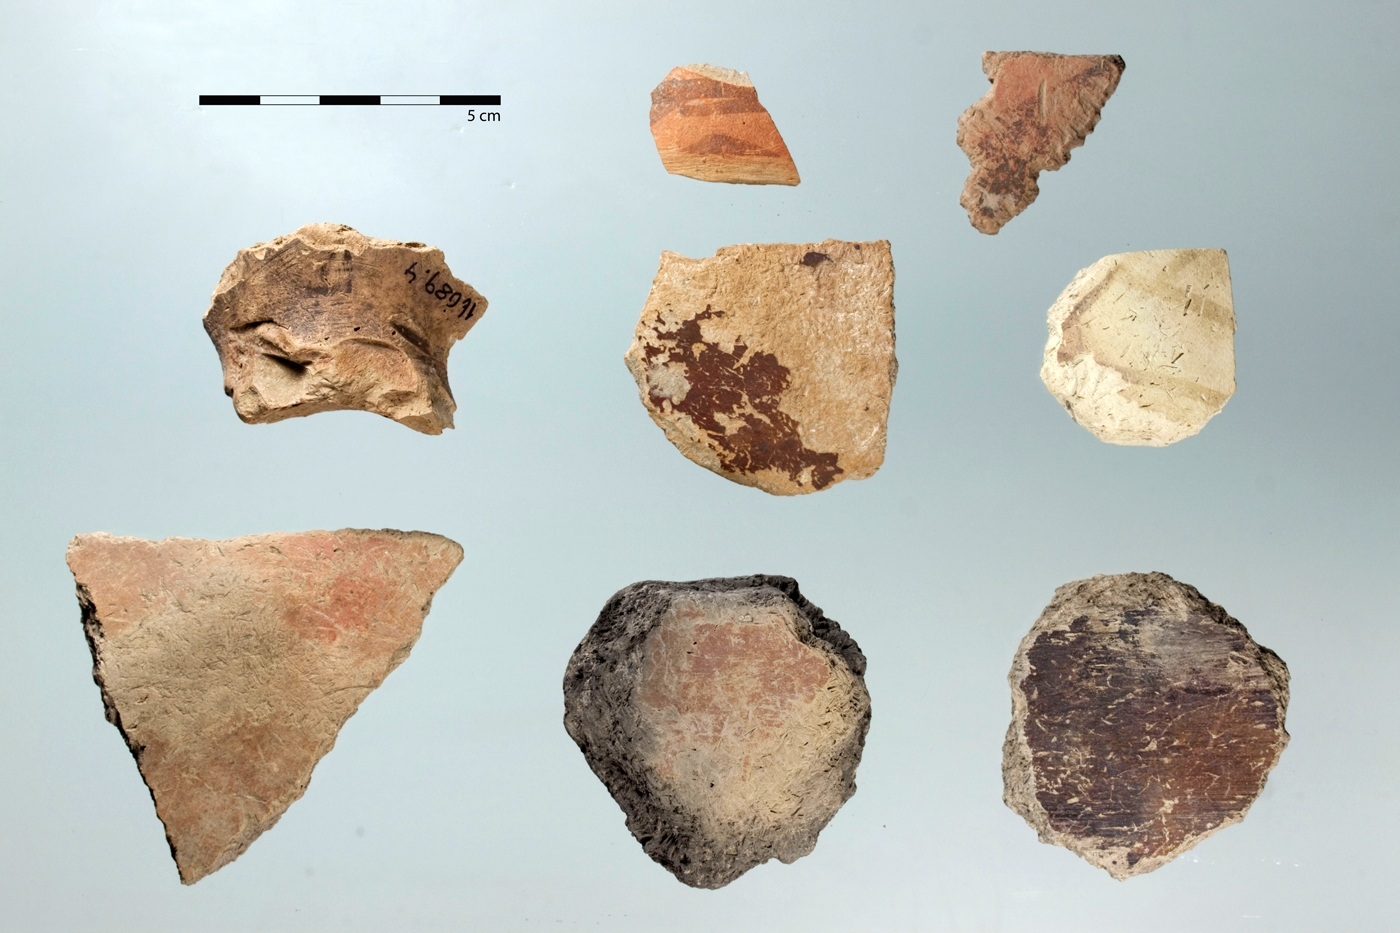 Ceramic tools made out of both Neolithic (bottom row and middle right and center) and Meana Horizon sherds (middle left and upper row).